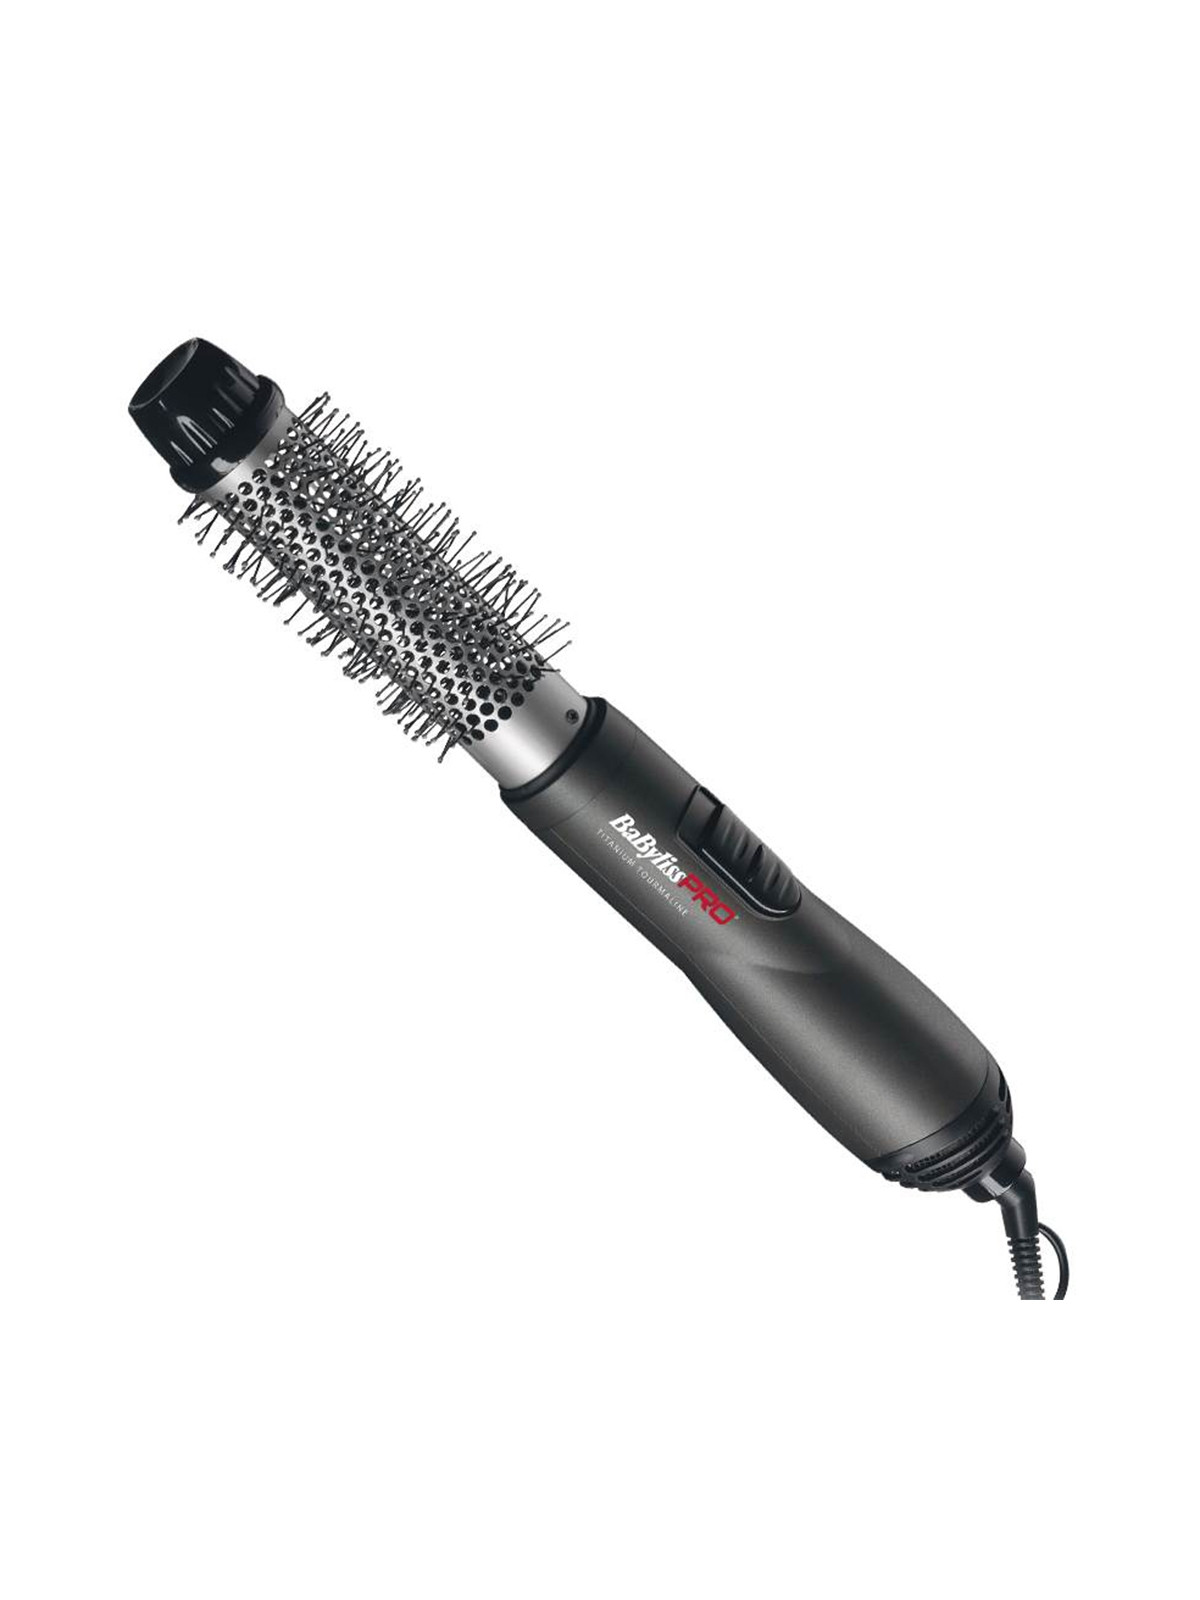 Babyliss PRO Airstyler 32mm